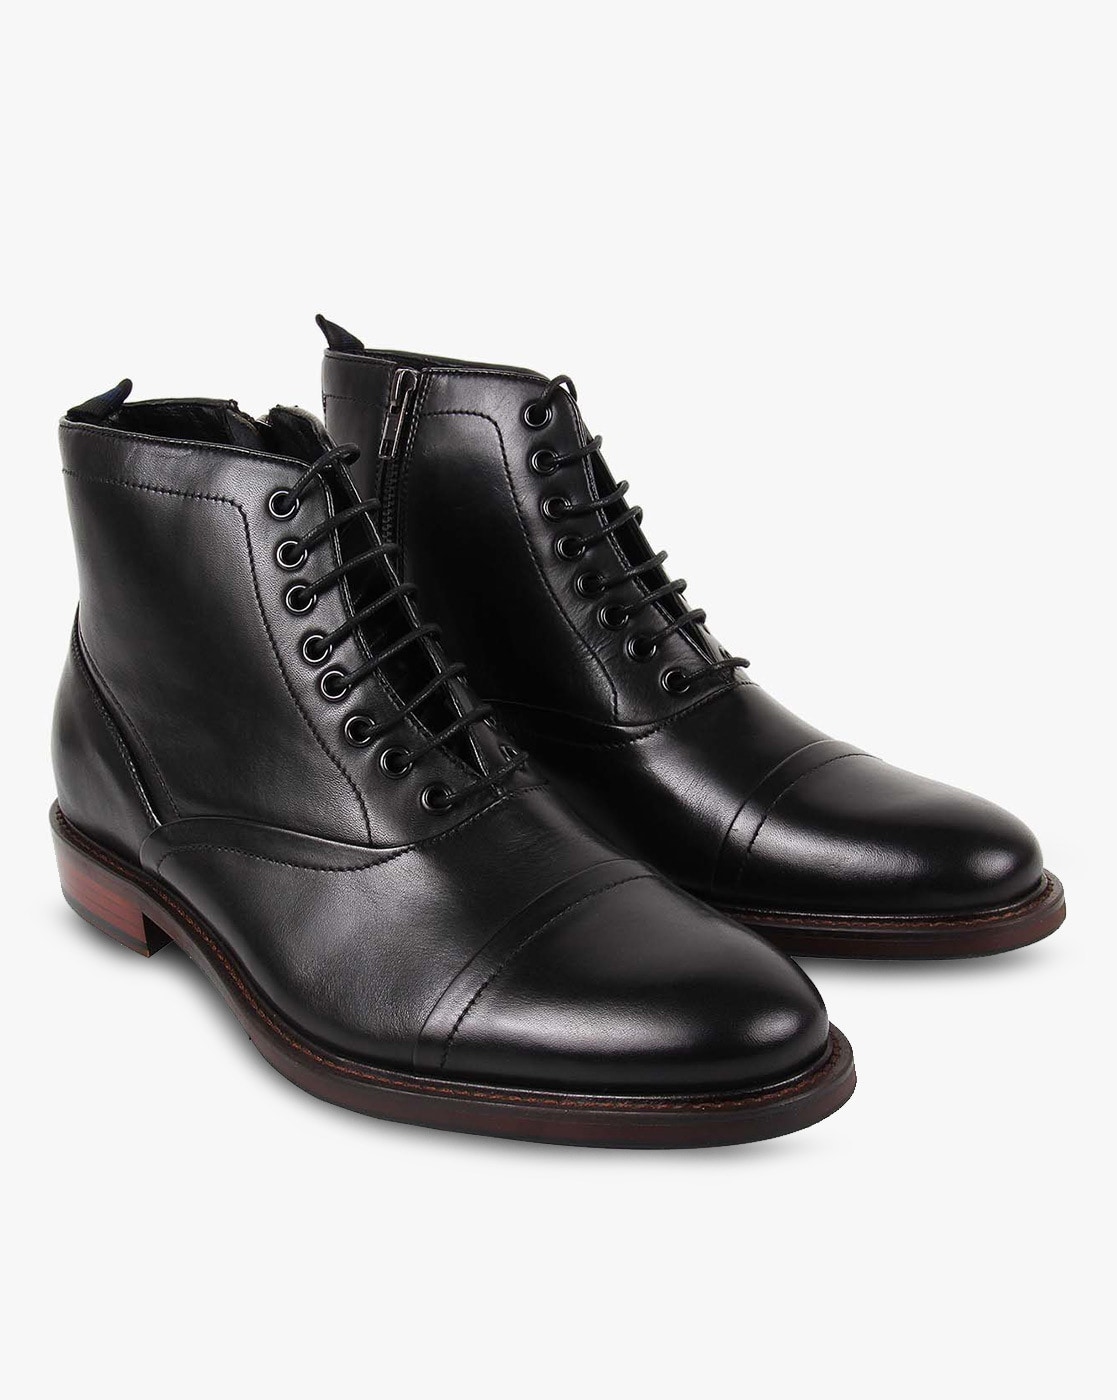 high top formal shoes